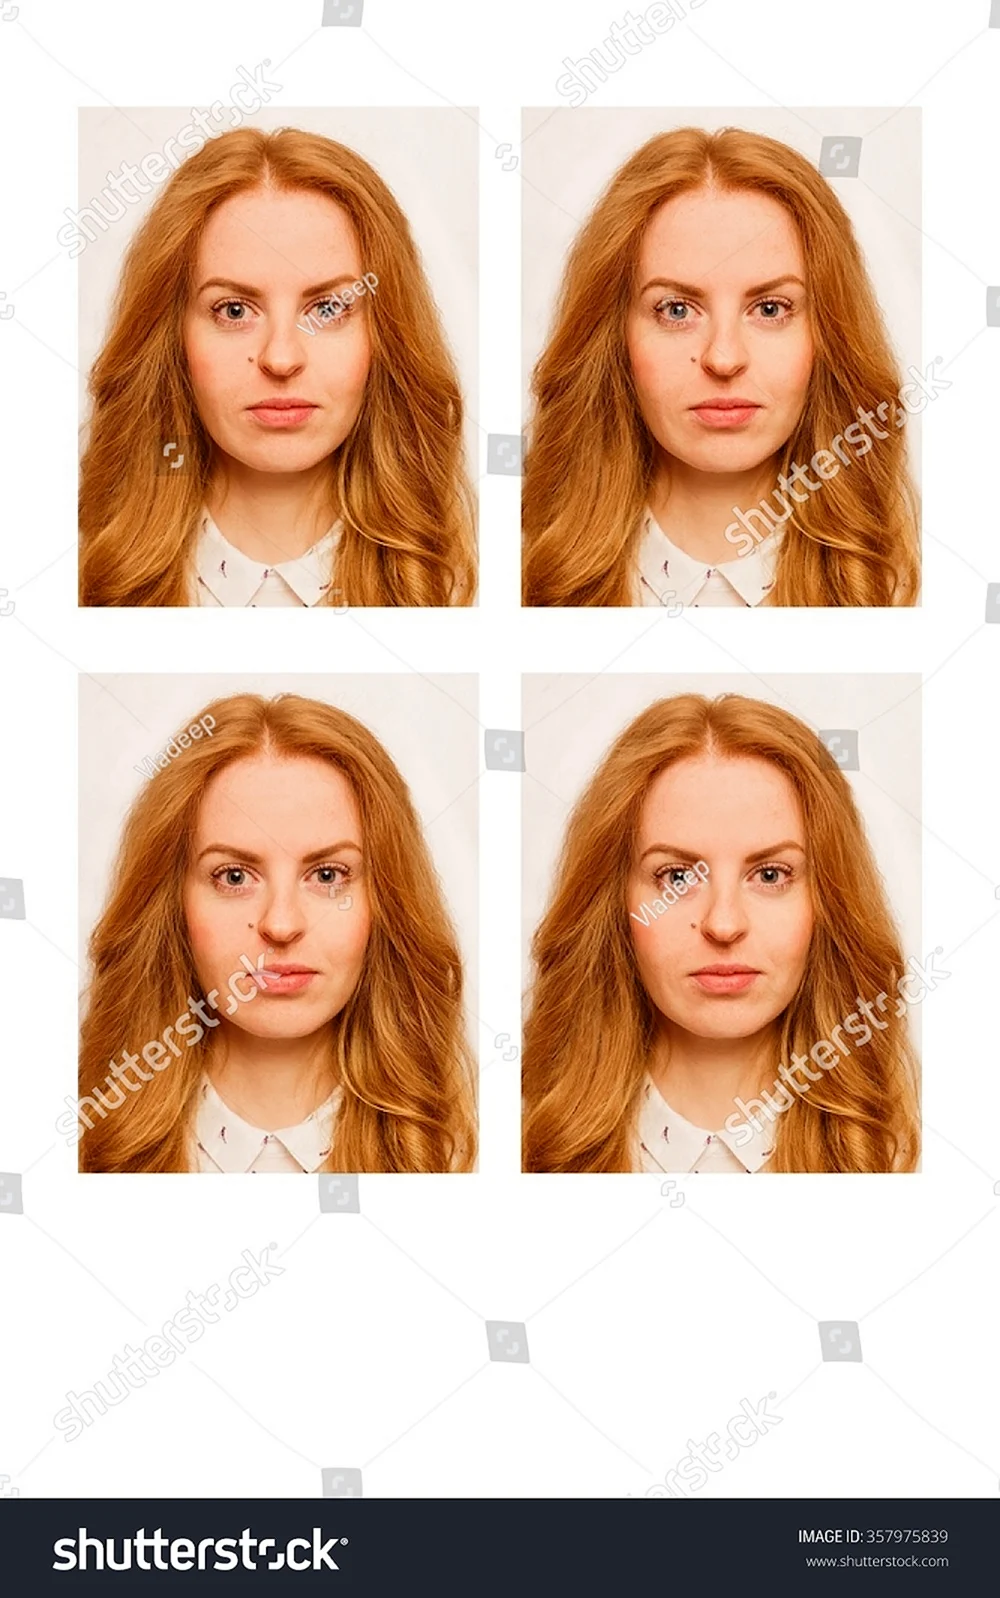 White women with Red hair Passport Size image